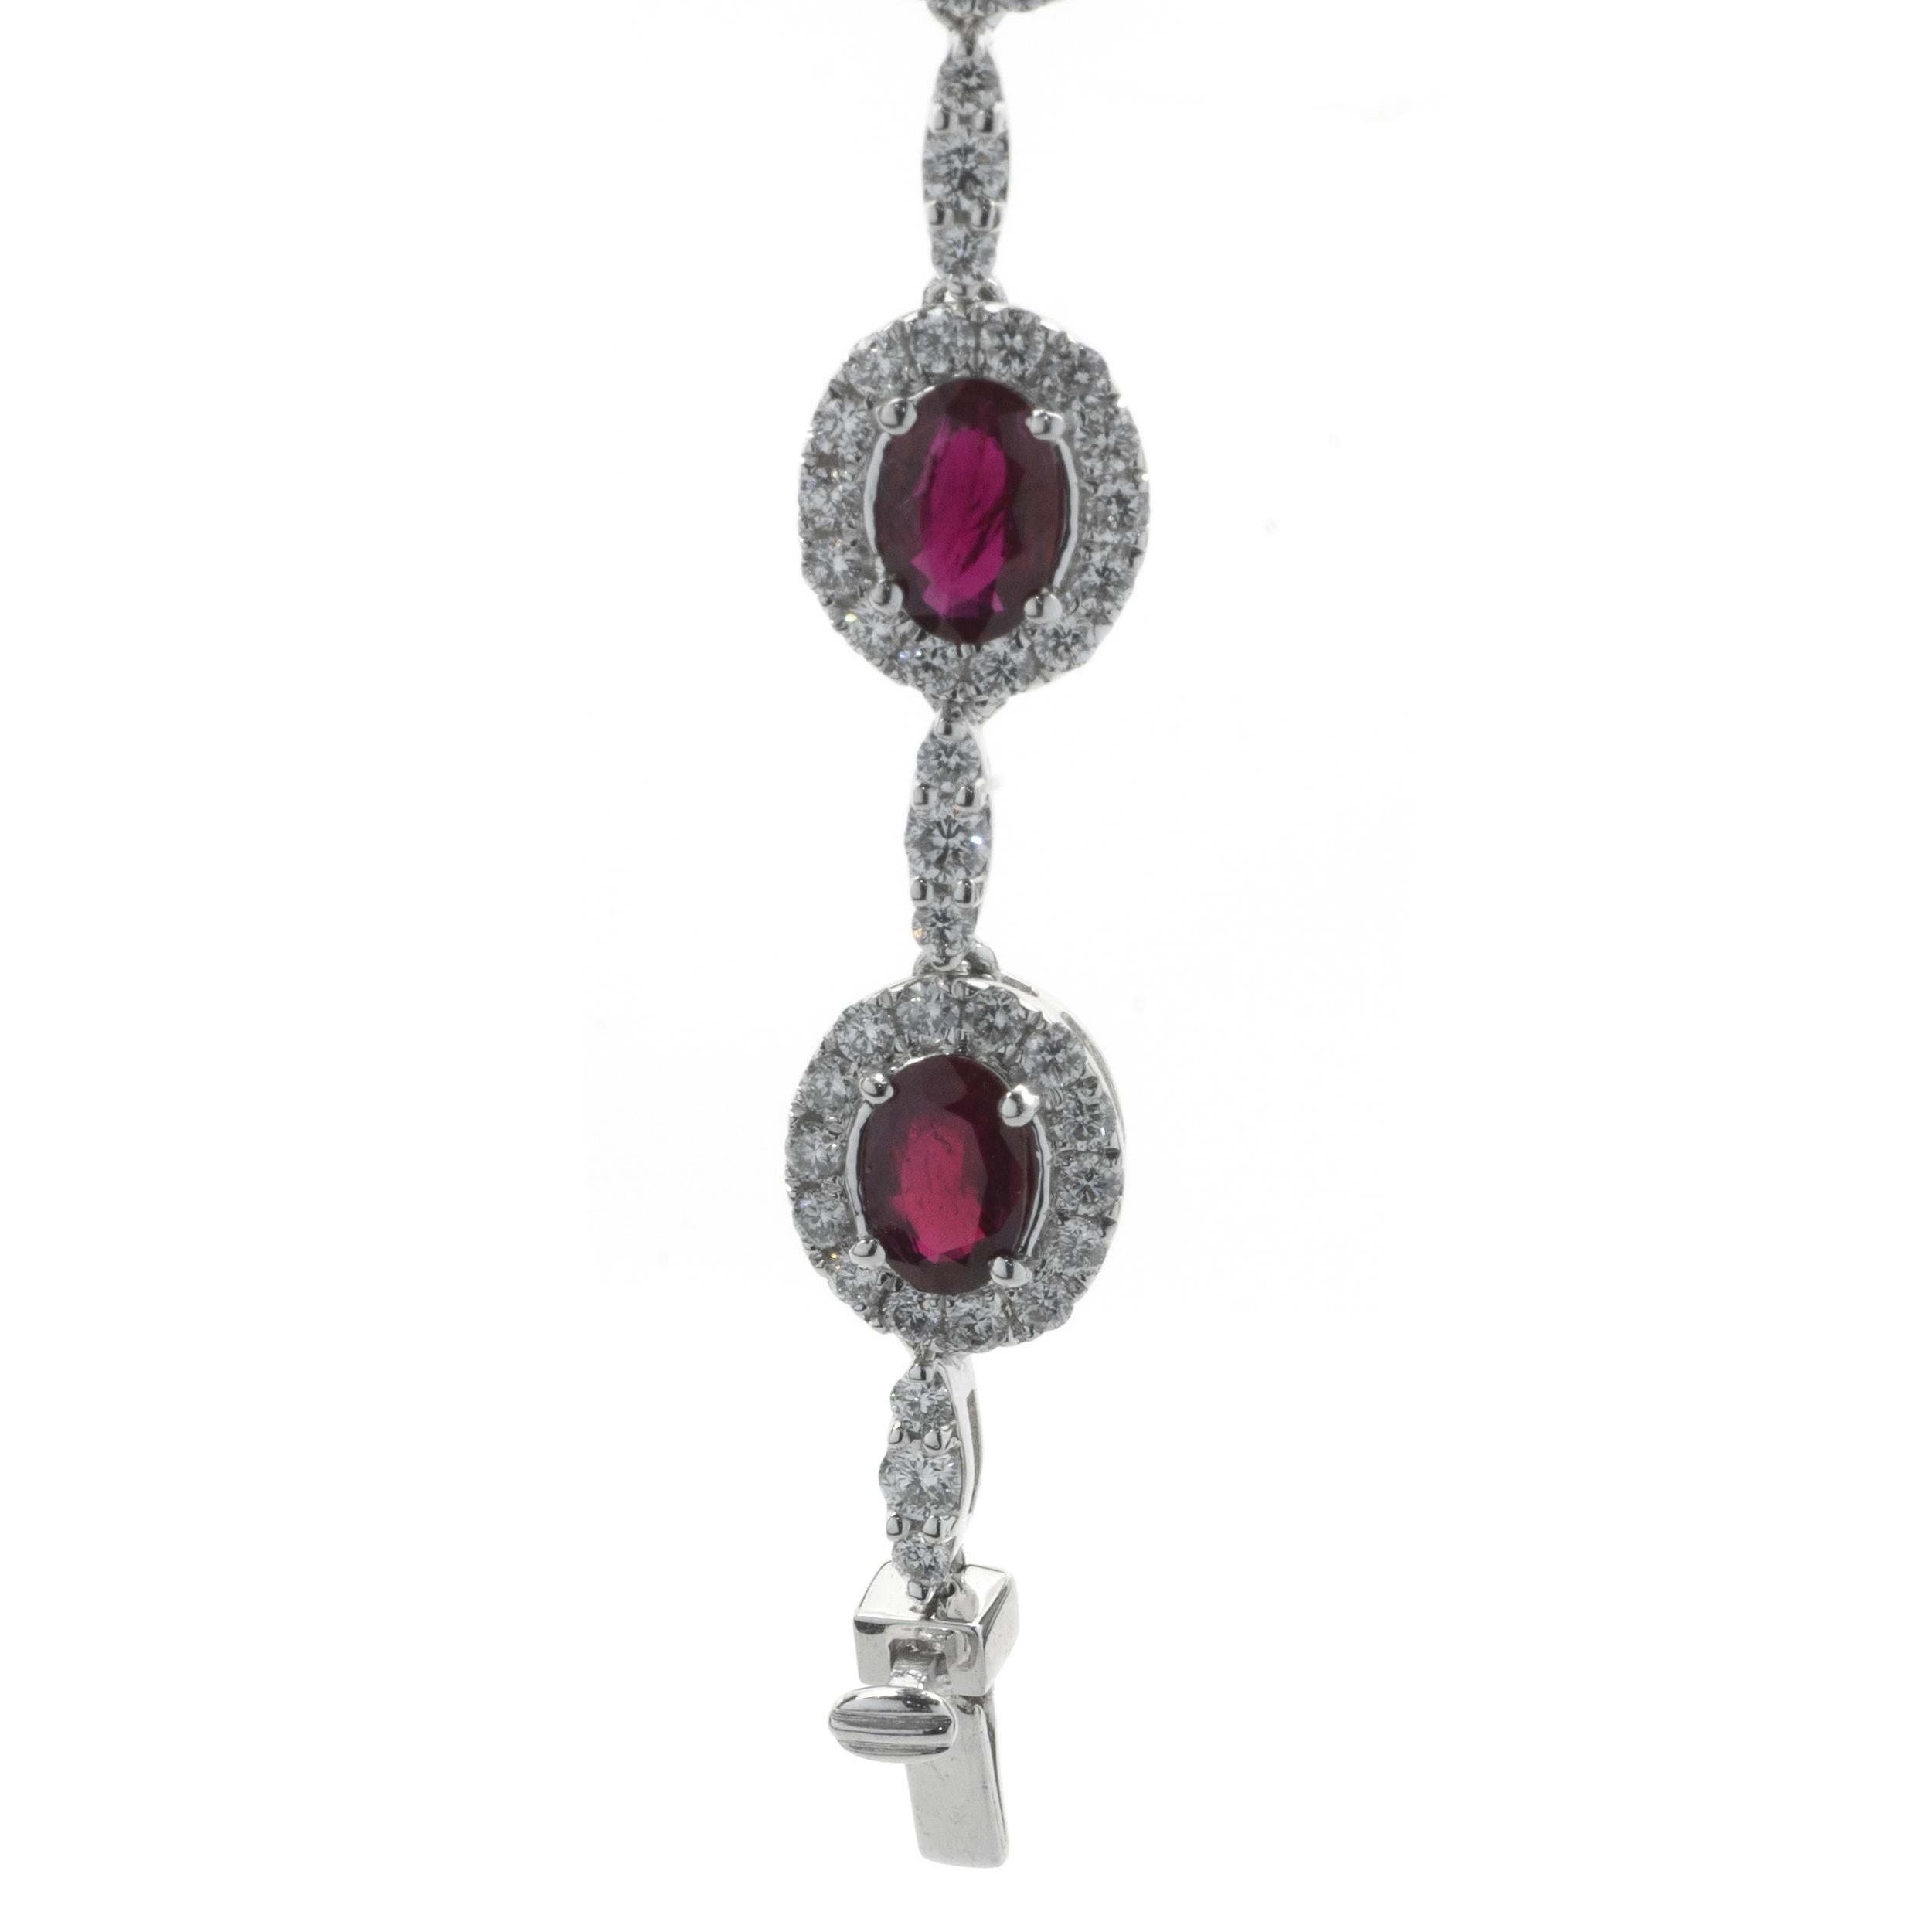 Designer: custom 
Material: 18K white gold
Diamond: 459 round brilliant cut = 6.37cttw
Color: G
Clarity: VS1
Ruby: 27 oval cut = 14.93cttw
Color: Pigeons Blood
Clarity: Fine Gem Quality, AAA+
Dimensions: necklace measures 16-inches long 
Weight: